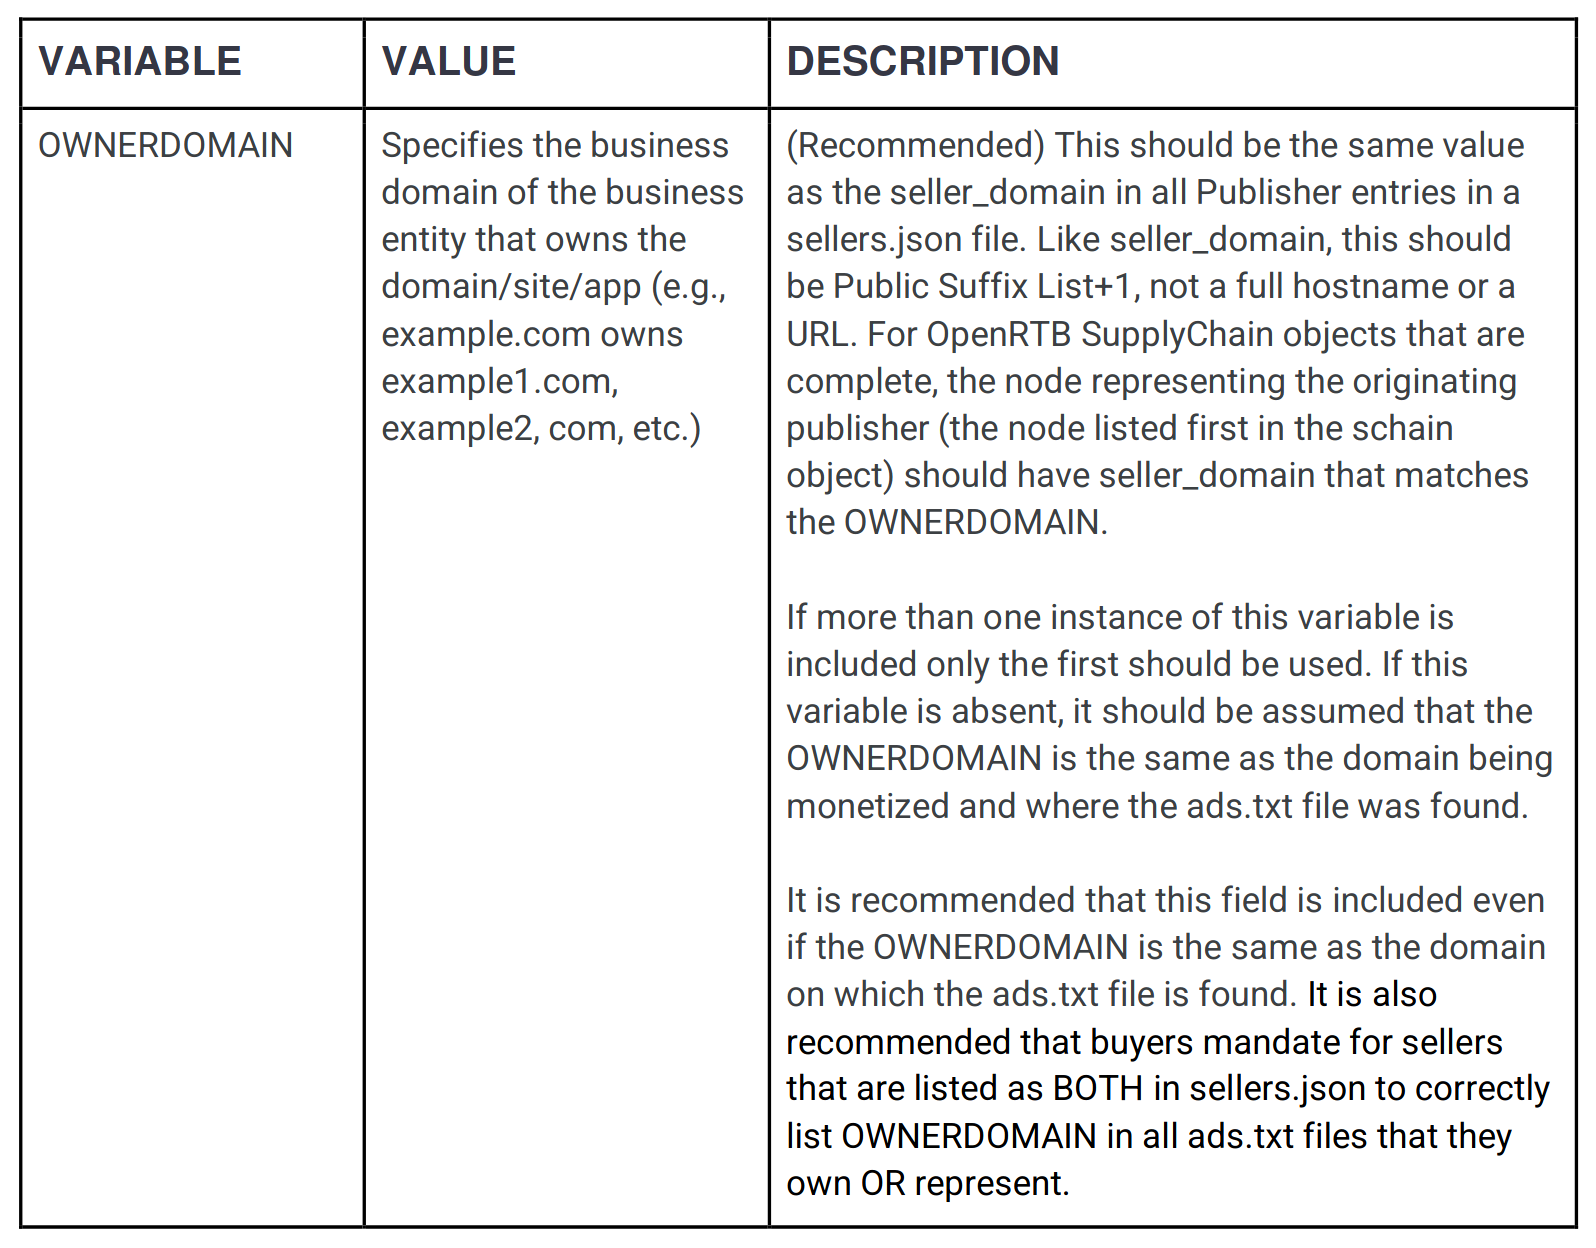 Variable: "OWNERDOMAIN", Value: "Specifies the business domain of the business entity that owns the domain/site/app (e.g., example.com owns example1.com, example2, com, etc.)", Description: "(Recommended) This should be the same value as the seller_domain in all Publisher entries in a sellers.json file. Like seller_domain, this should be Public Suffix List+1, not a full hostname or a URL. For OpenRTB SupplyChain objects that are complete, the node representing the originating publisher (the node listed first in the schain object) should have seller_domain that matches the OWNERDOMAIN. If more than one instance of this variable is included only the first should be used. If this variable is absent, it should be assumed that the OWNERDOMAIN is the same as the domain being monetized and where the ads.txt file was found. It is recommended that this field is included even if the OWNERDOMAIN is the same as the domain on which the ads.txt file is found. It is also recommended that buyers mandate for sellers that are listed as BOTH in sellers.json to correctly list OWNERDOMAIN in all ads.txt files that they own OR represent."